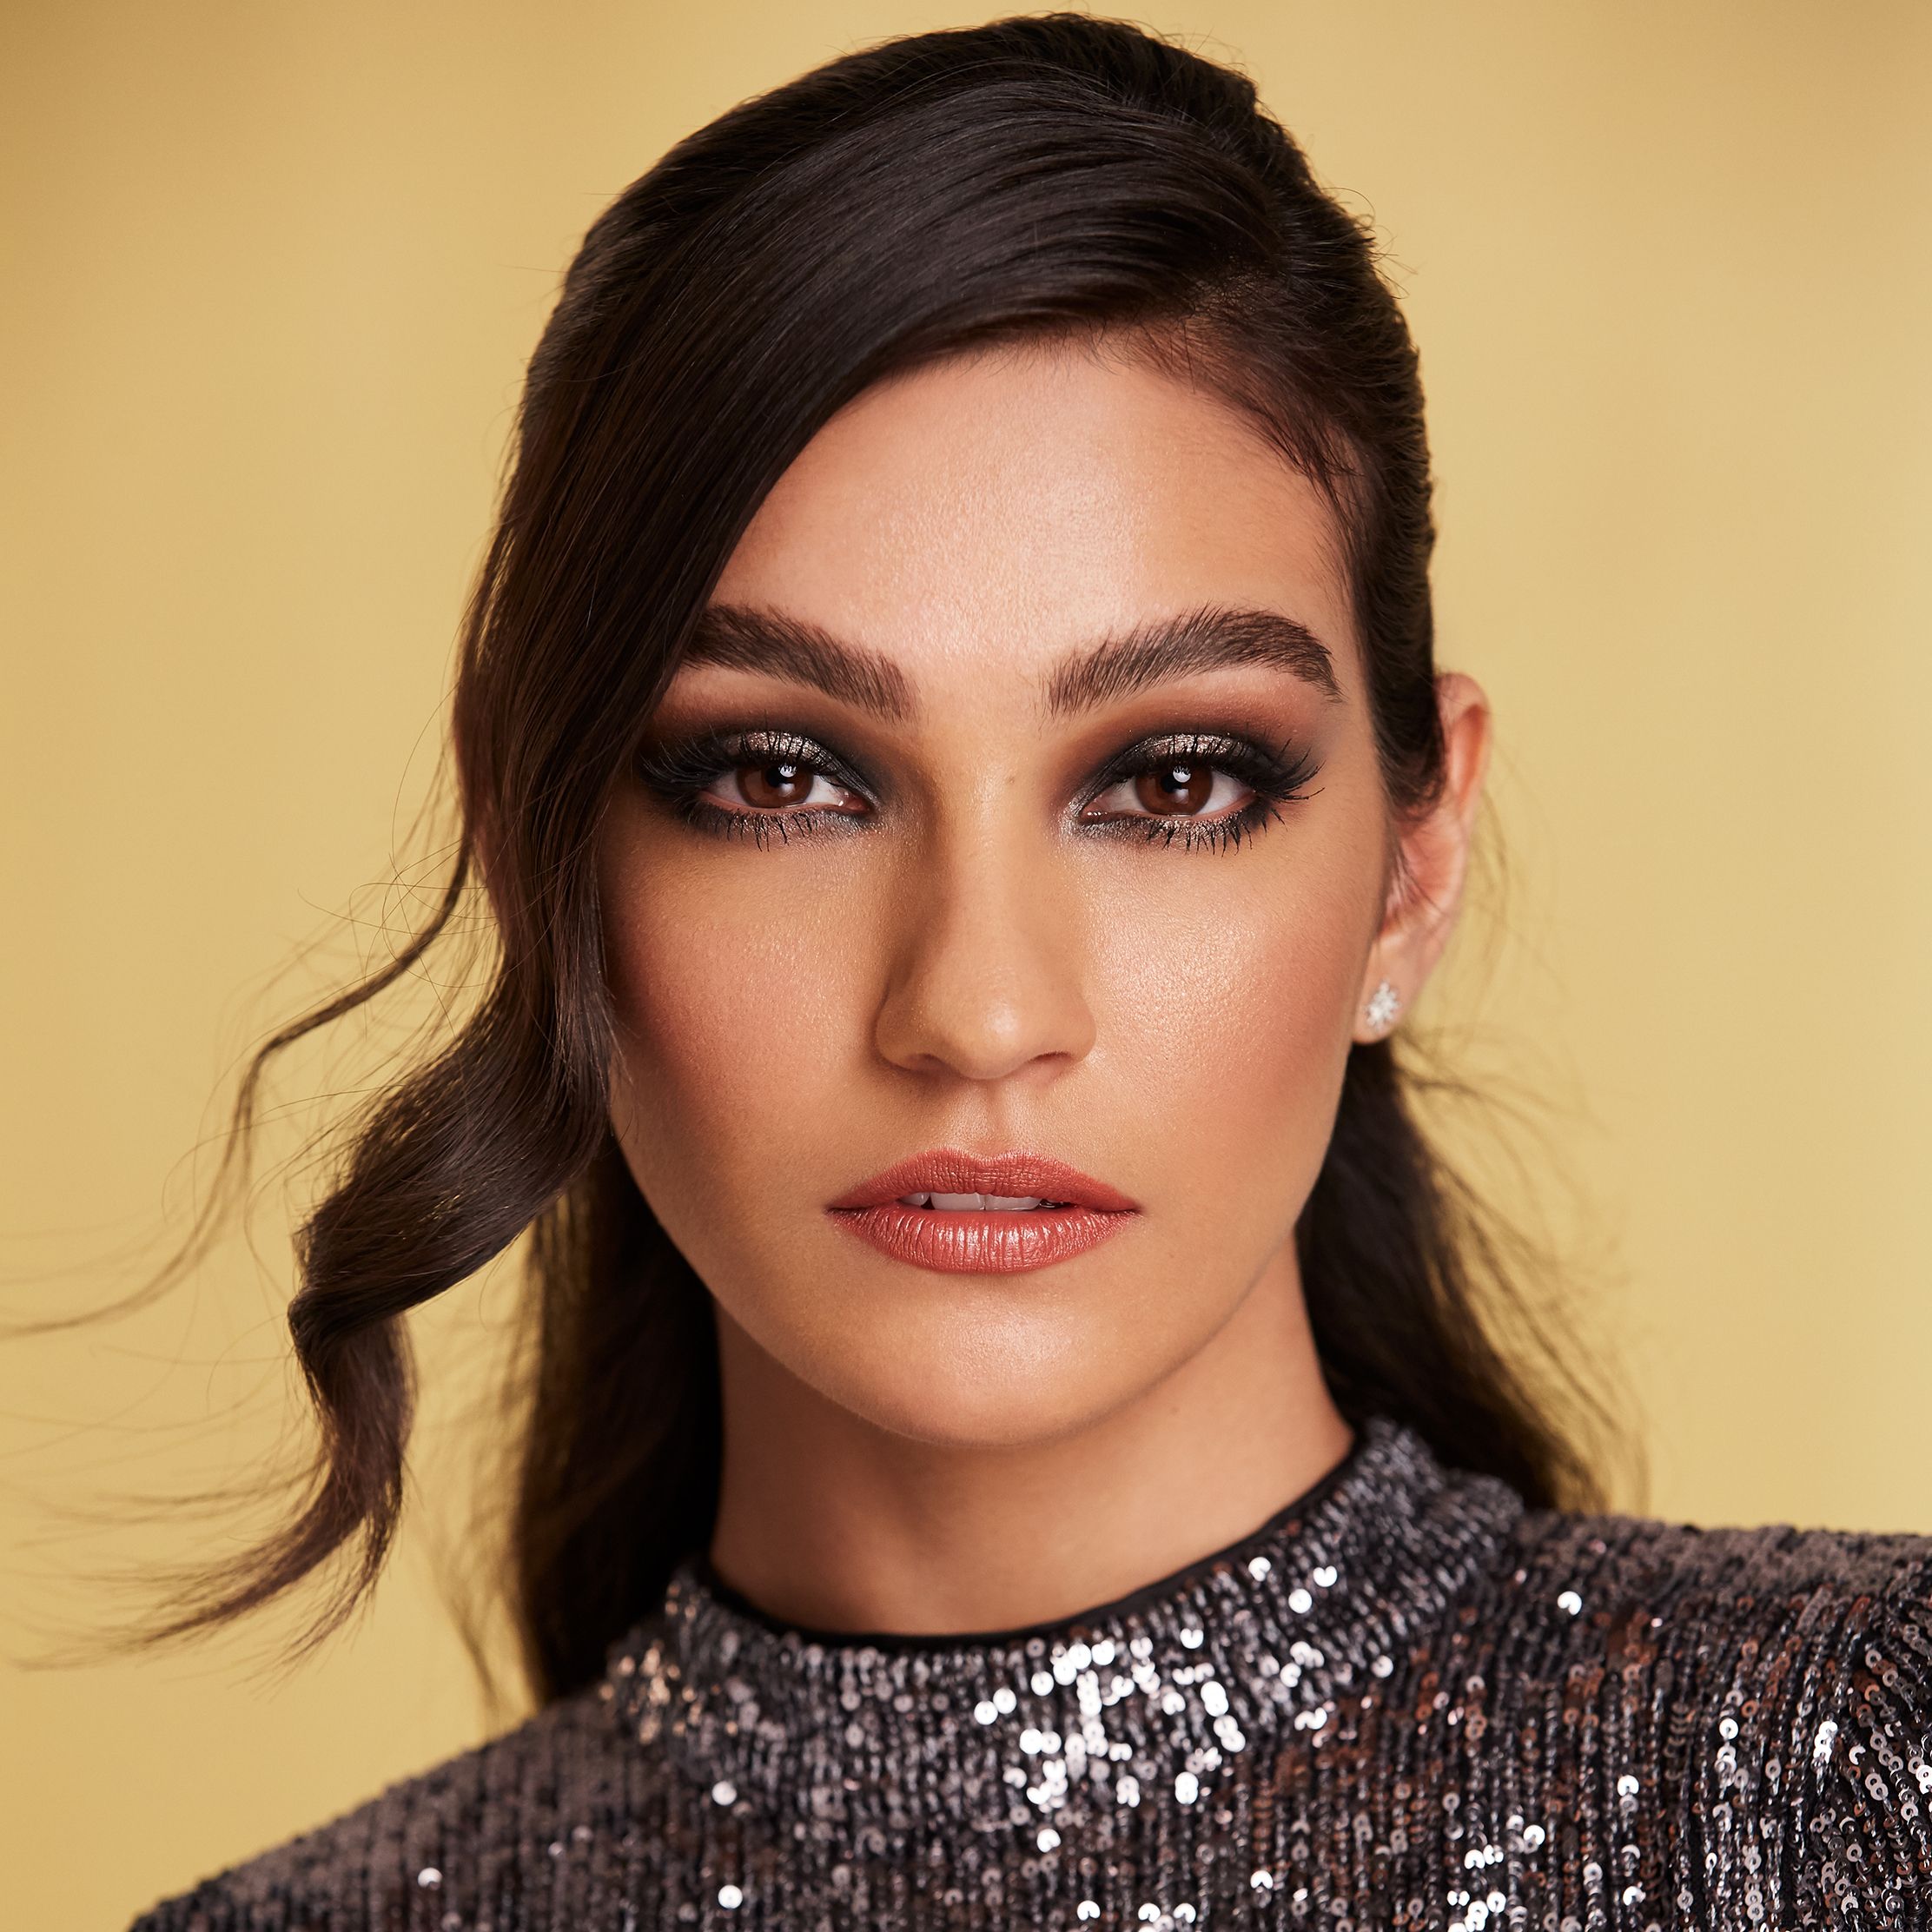 Model with sparkly eye make-up